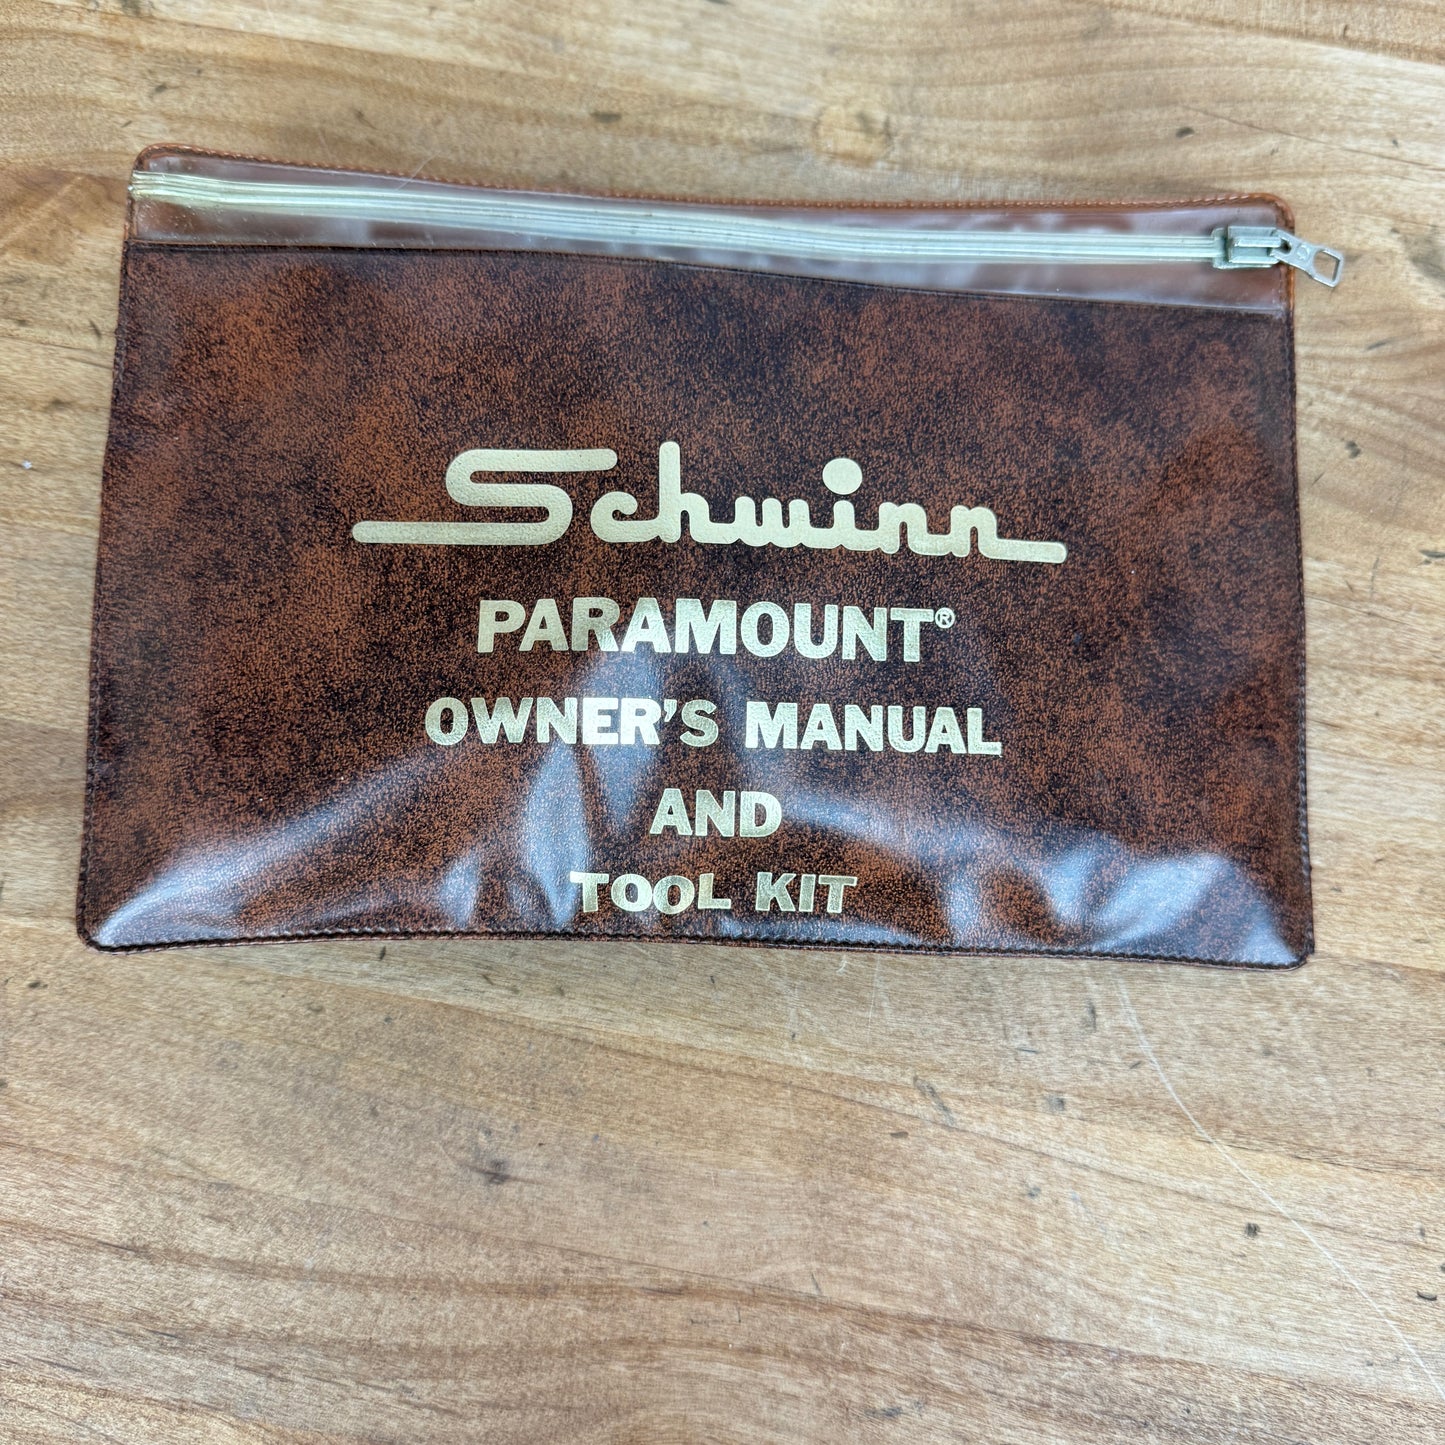 Vintage/Mint! Schwinn Paramount Bicycle Owners Manual & Tool Kit for Campagnolo